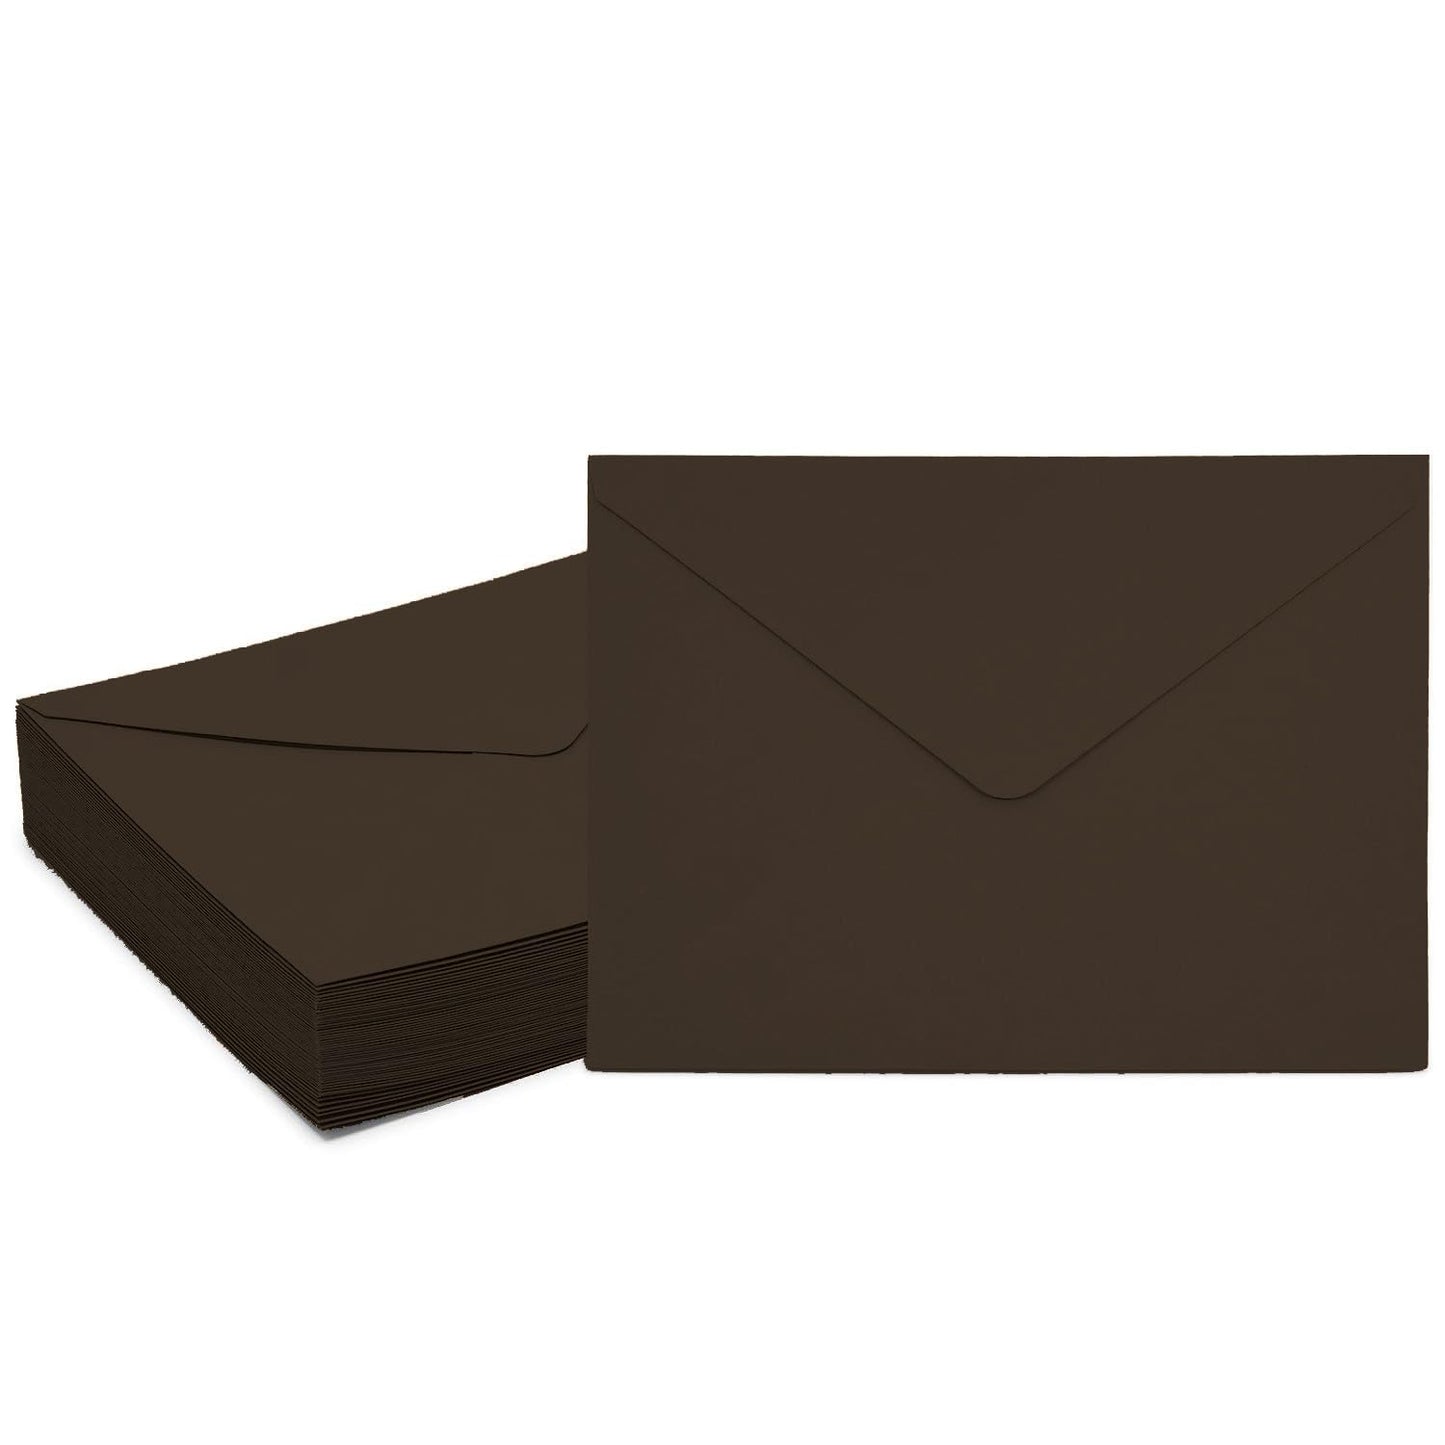 AccuPrints Cream Color color Envelopes Pack of 25 | Size 5.1 by 7.1 inch - Thickness 120 gsm